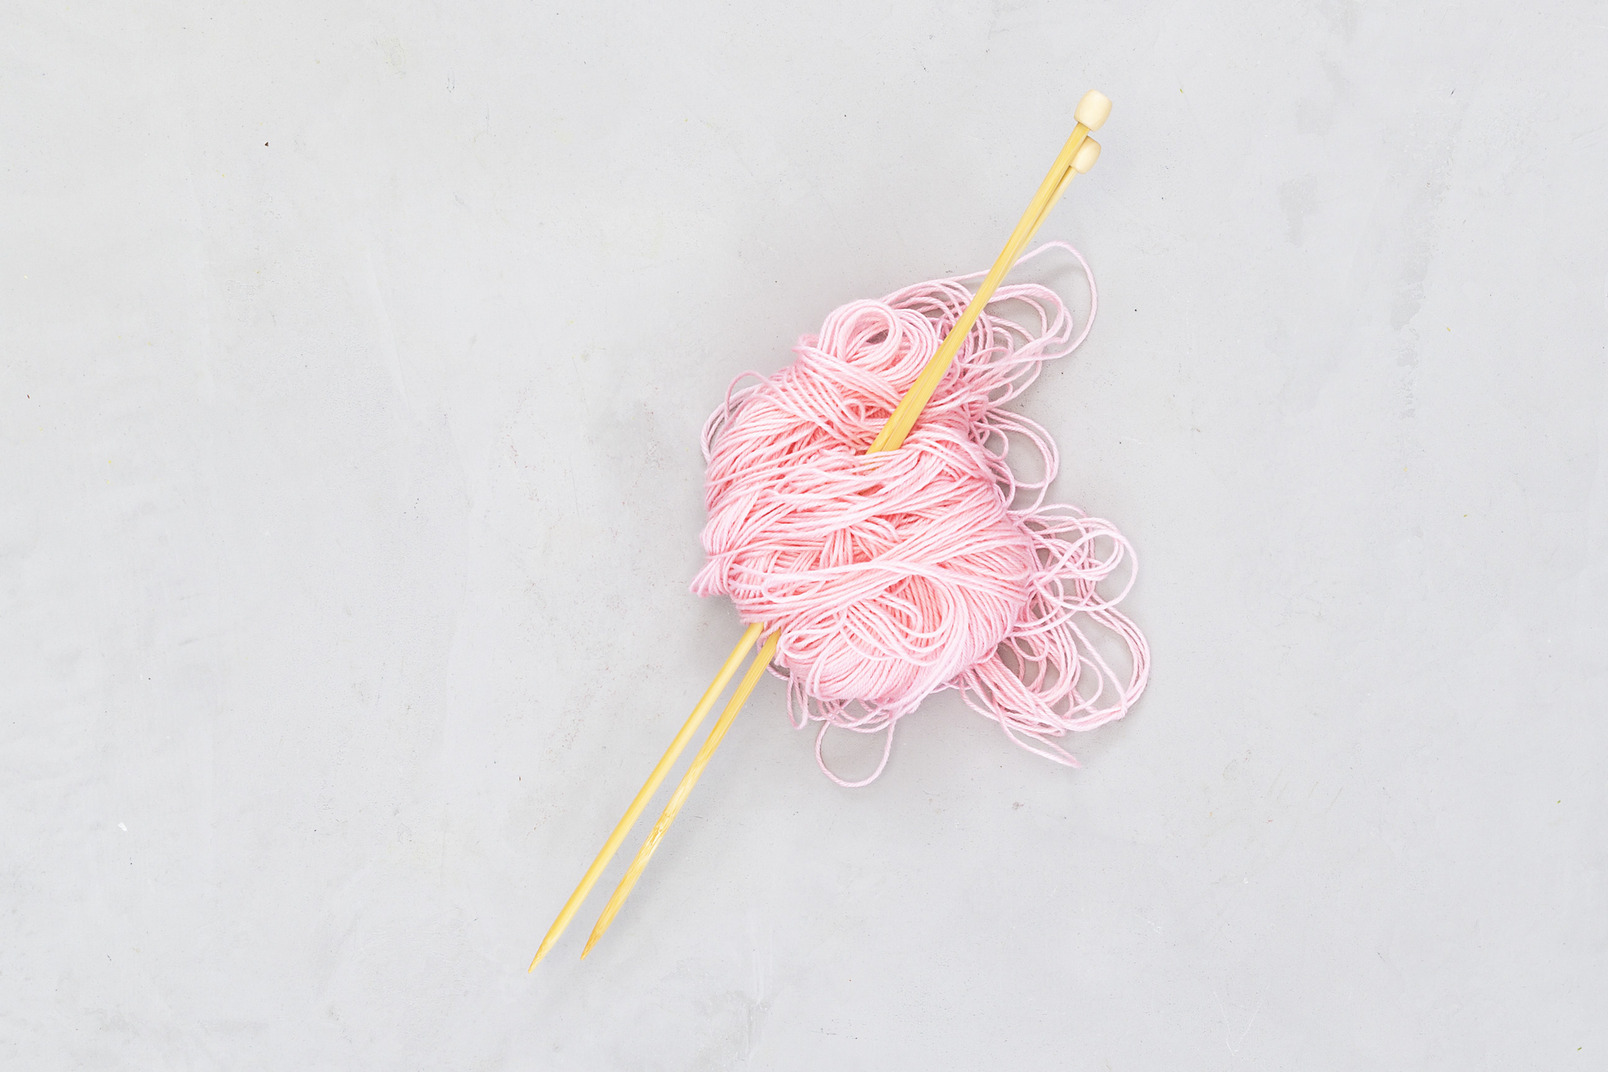 Pink yarn with wooden needles in it